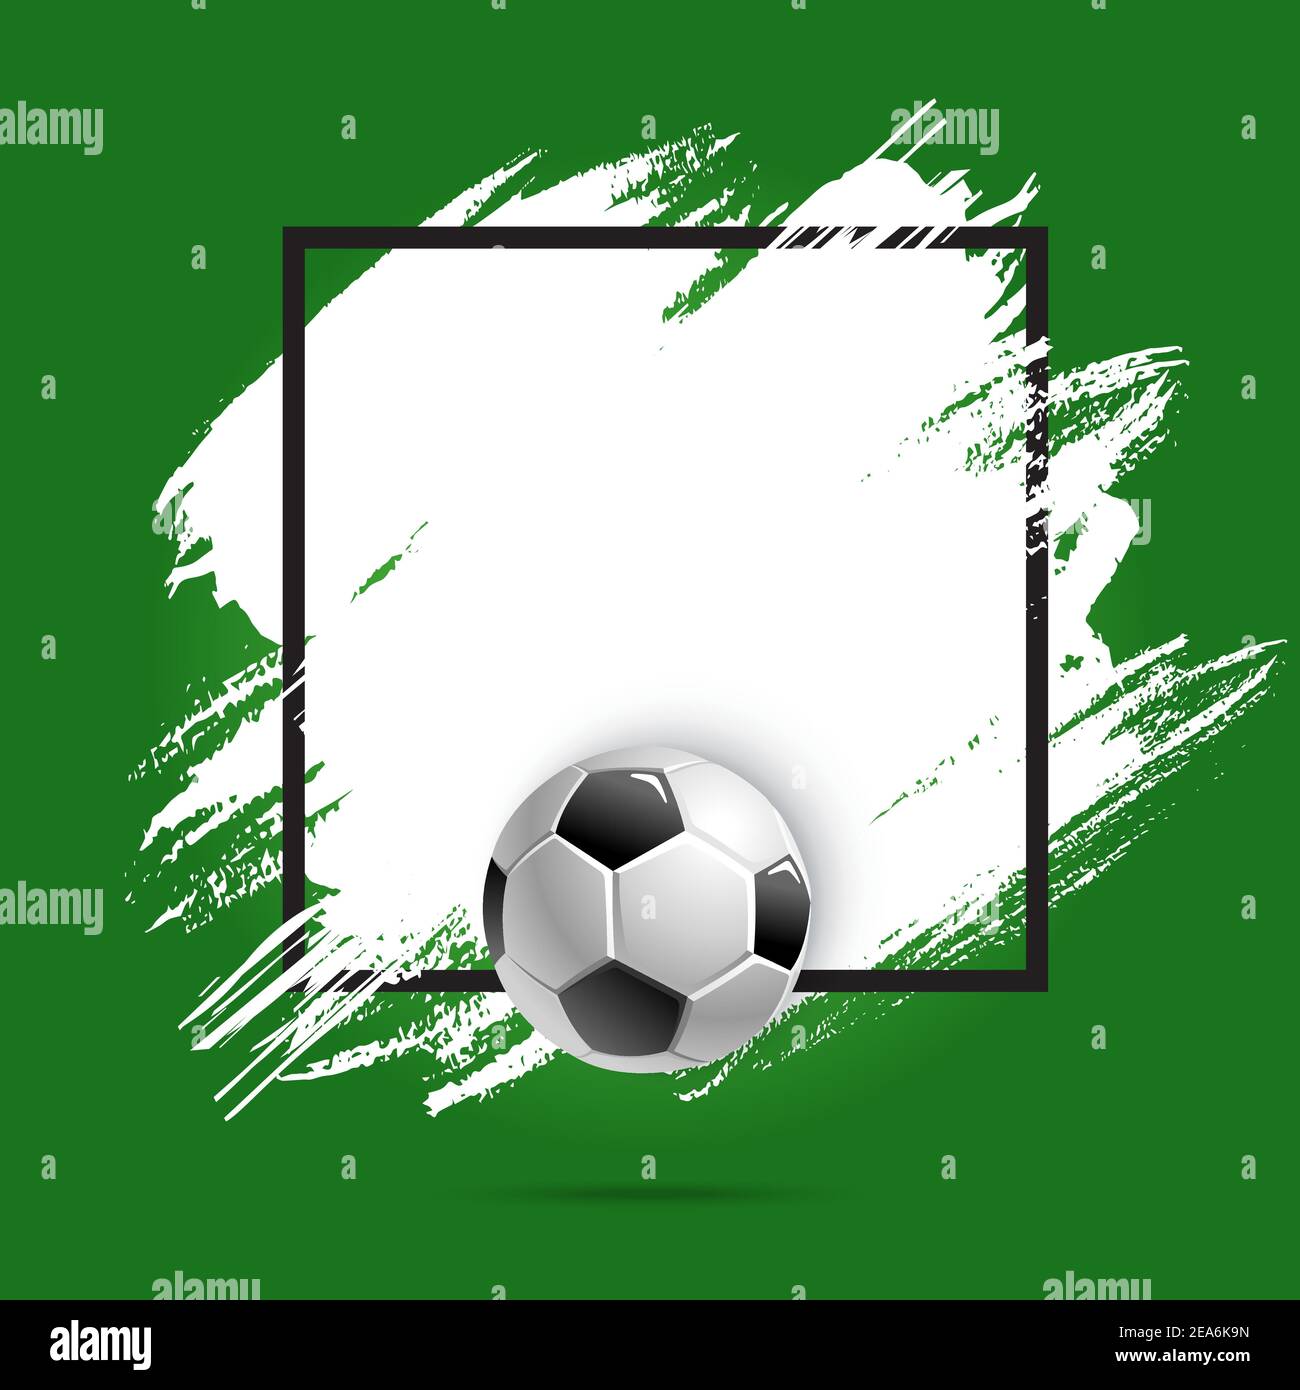 Soccer or football cup, sport ball, vector poster background or